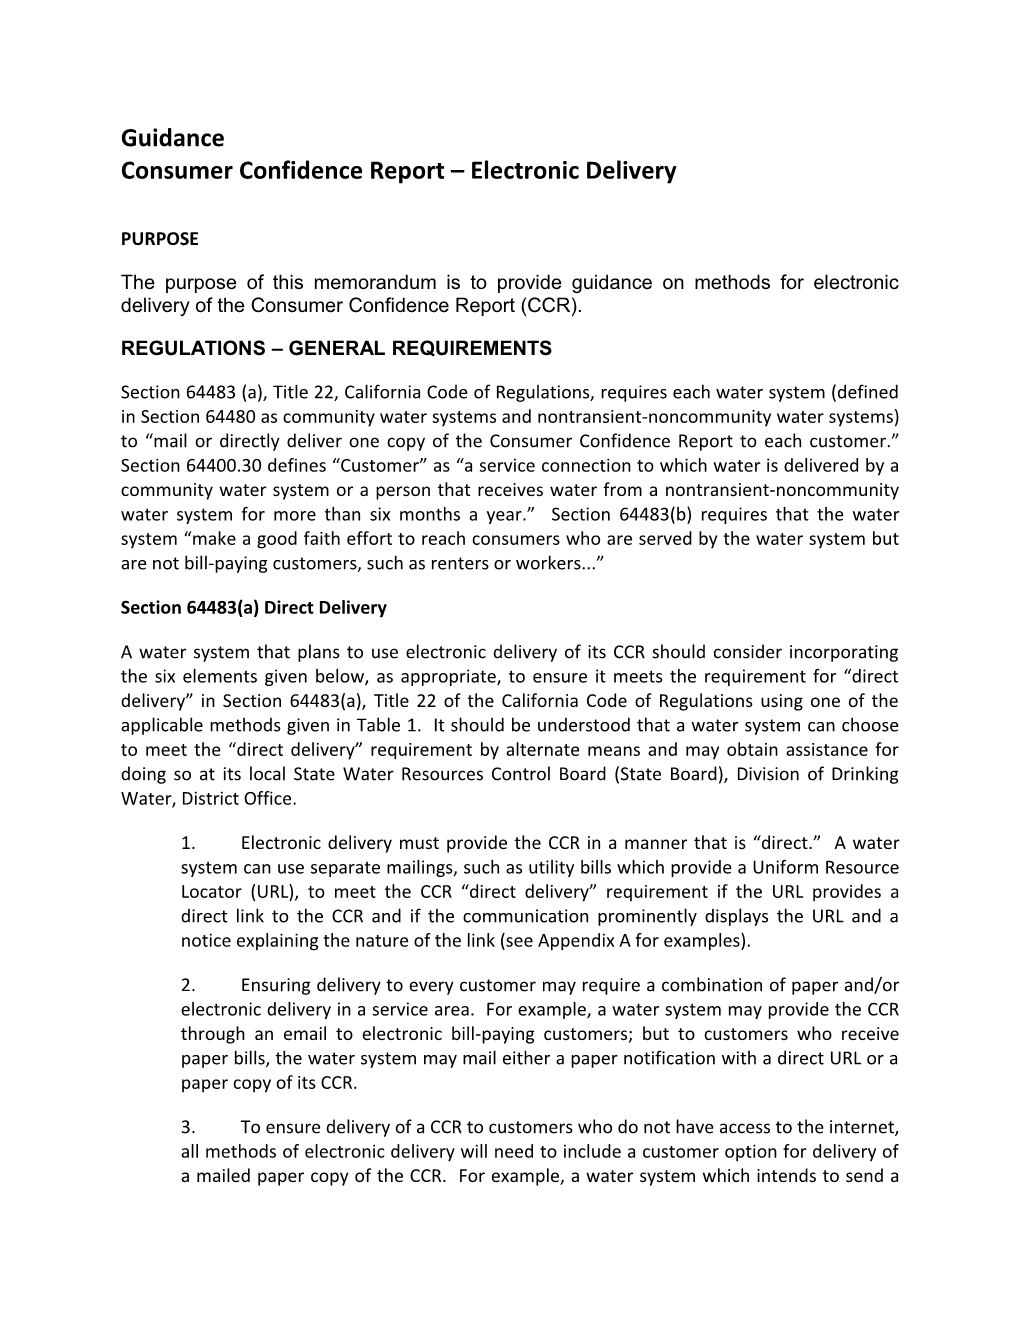 Consumer Confidence Report Electronic Delivery